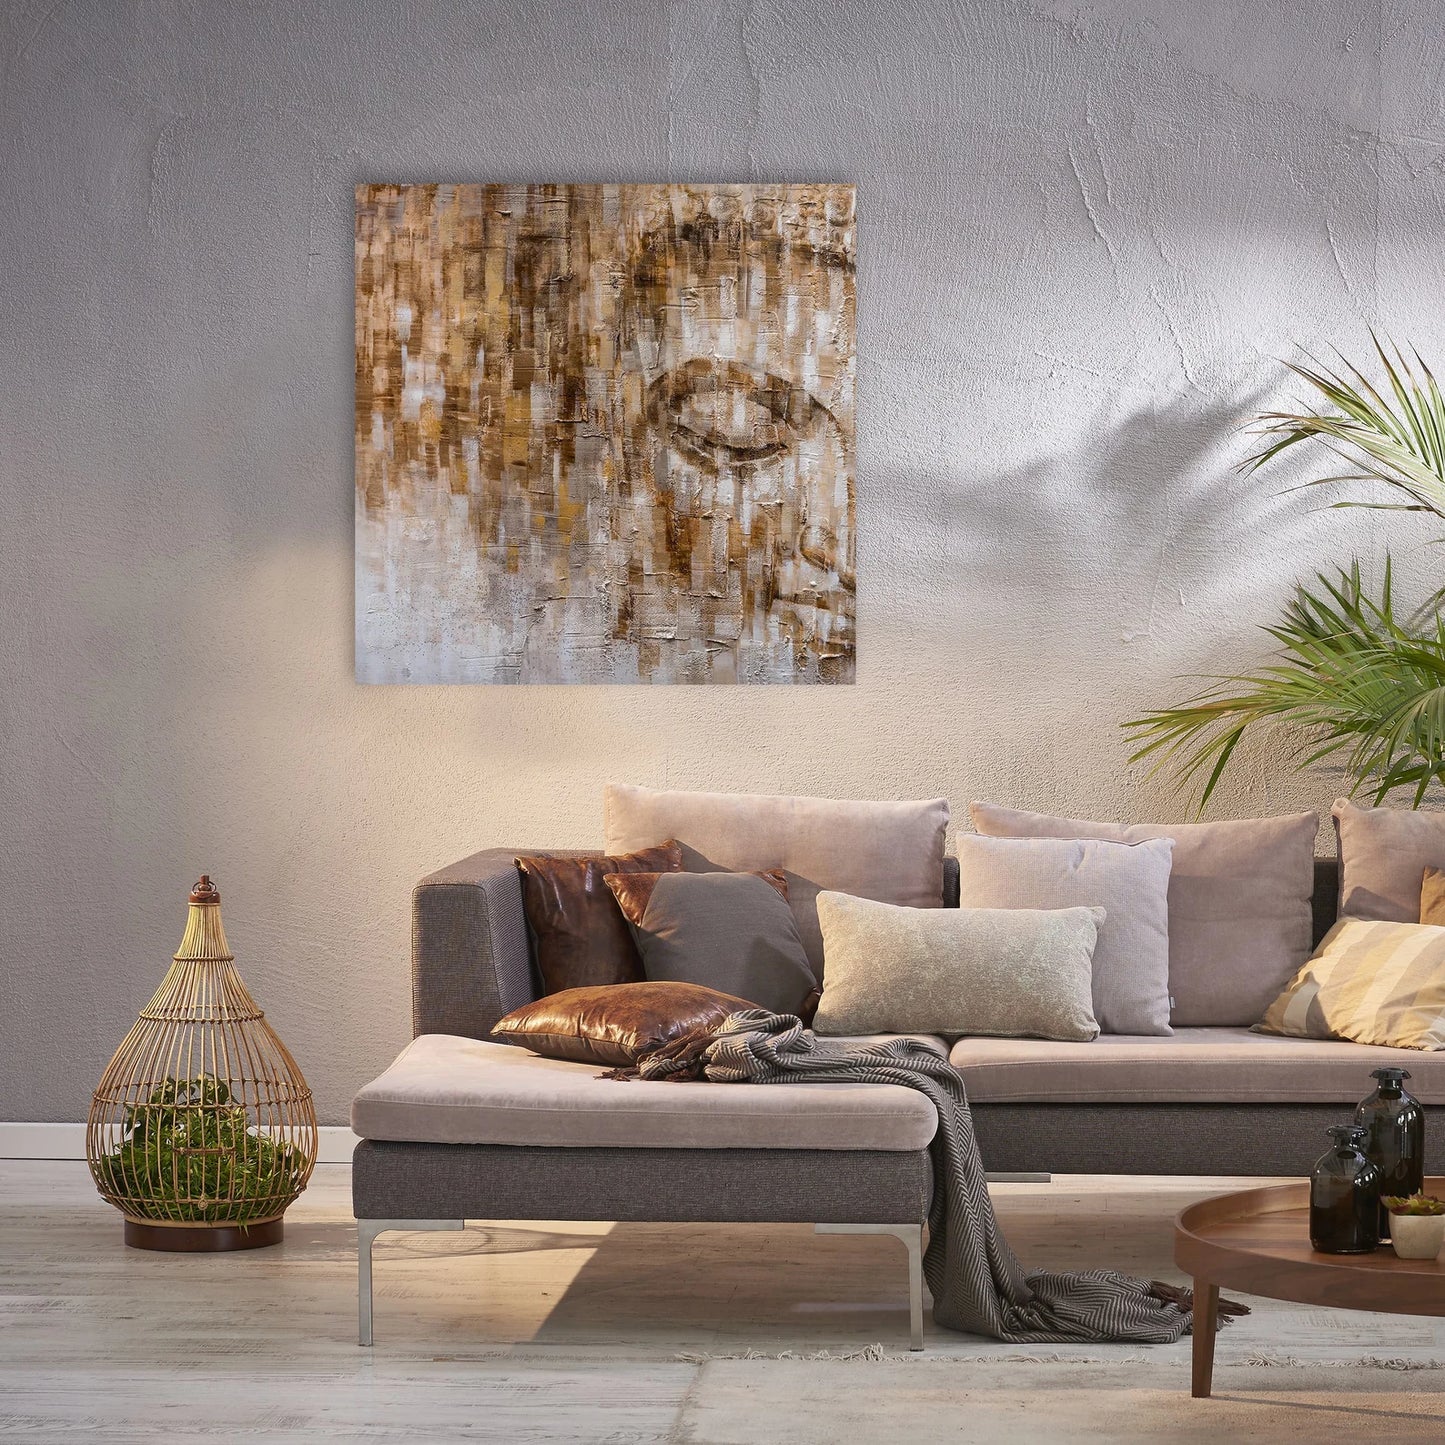 Abstract Hand-painted "Tranquil Buddha Reverie - I" Oil painting on canvas original, Canvas Wall art, wall decor - Wrapped Canvas Painting